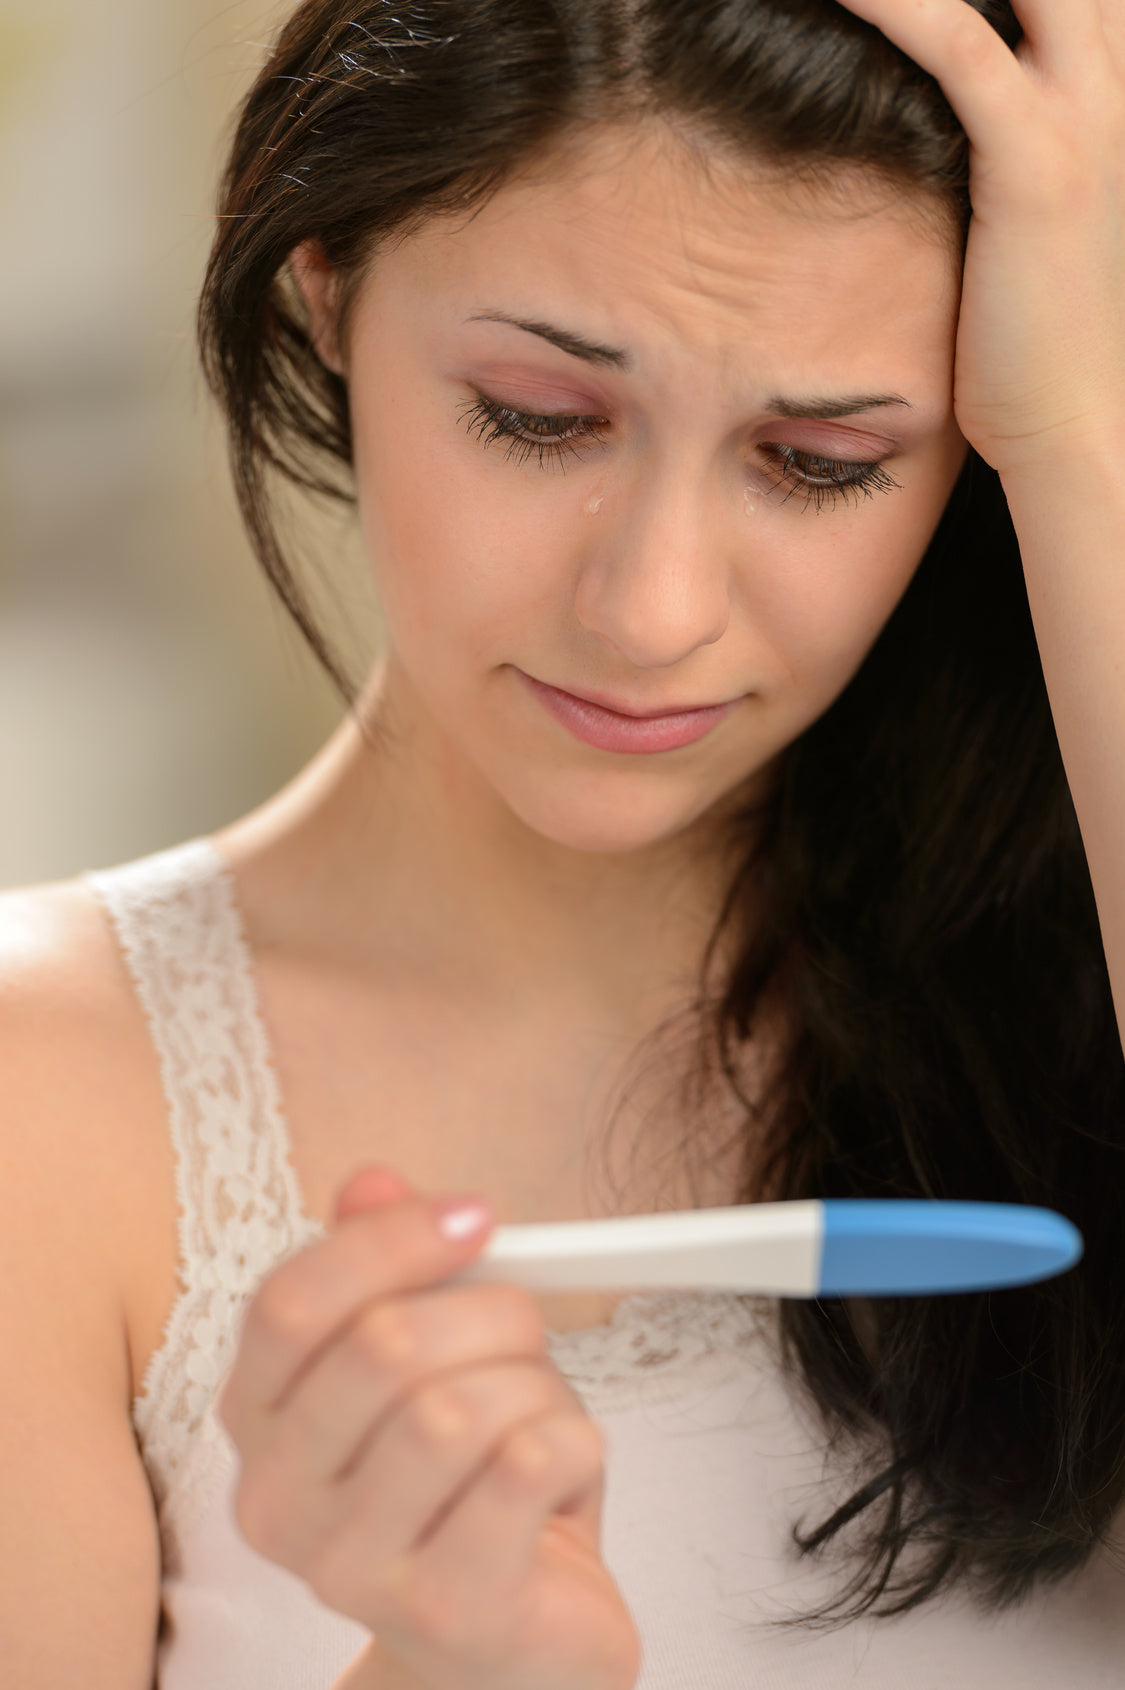 The Mystery of the Fading Pregnancy Test